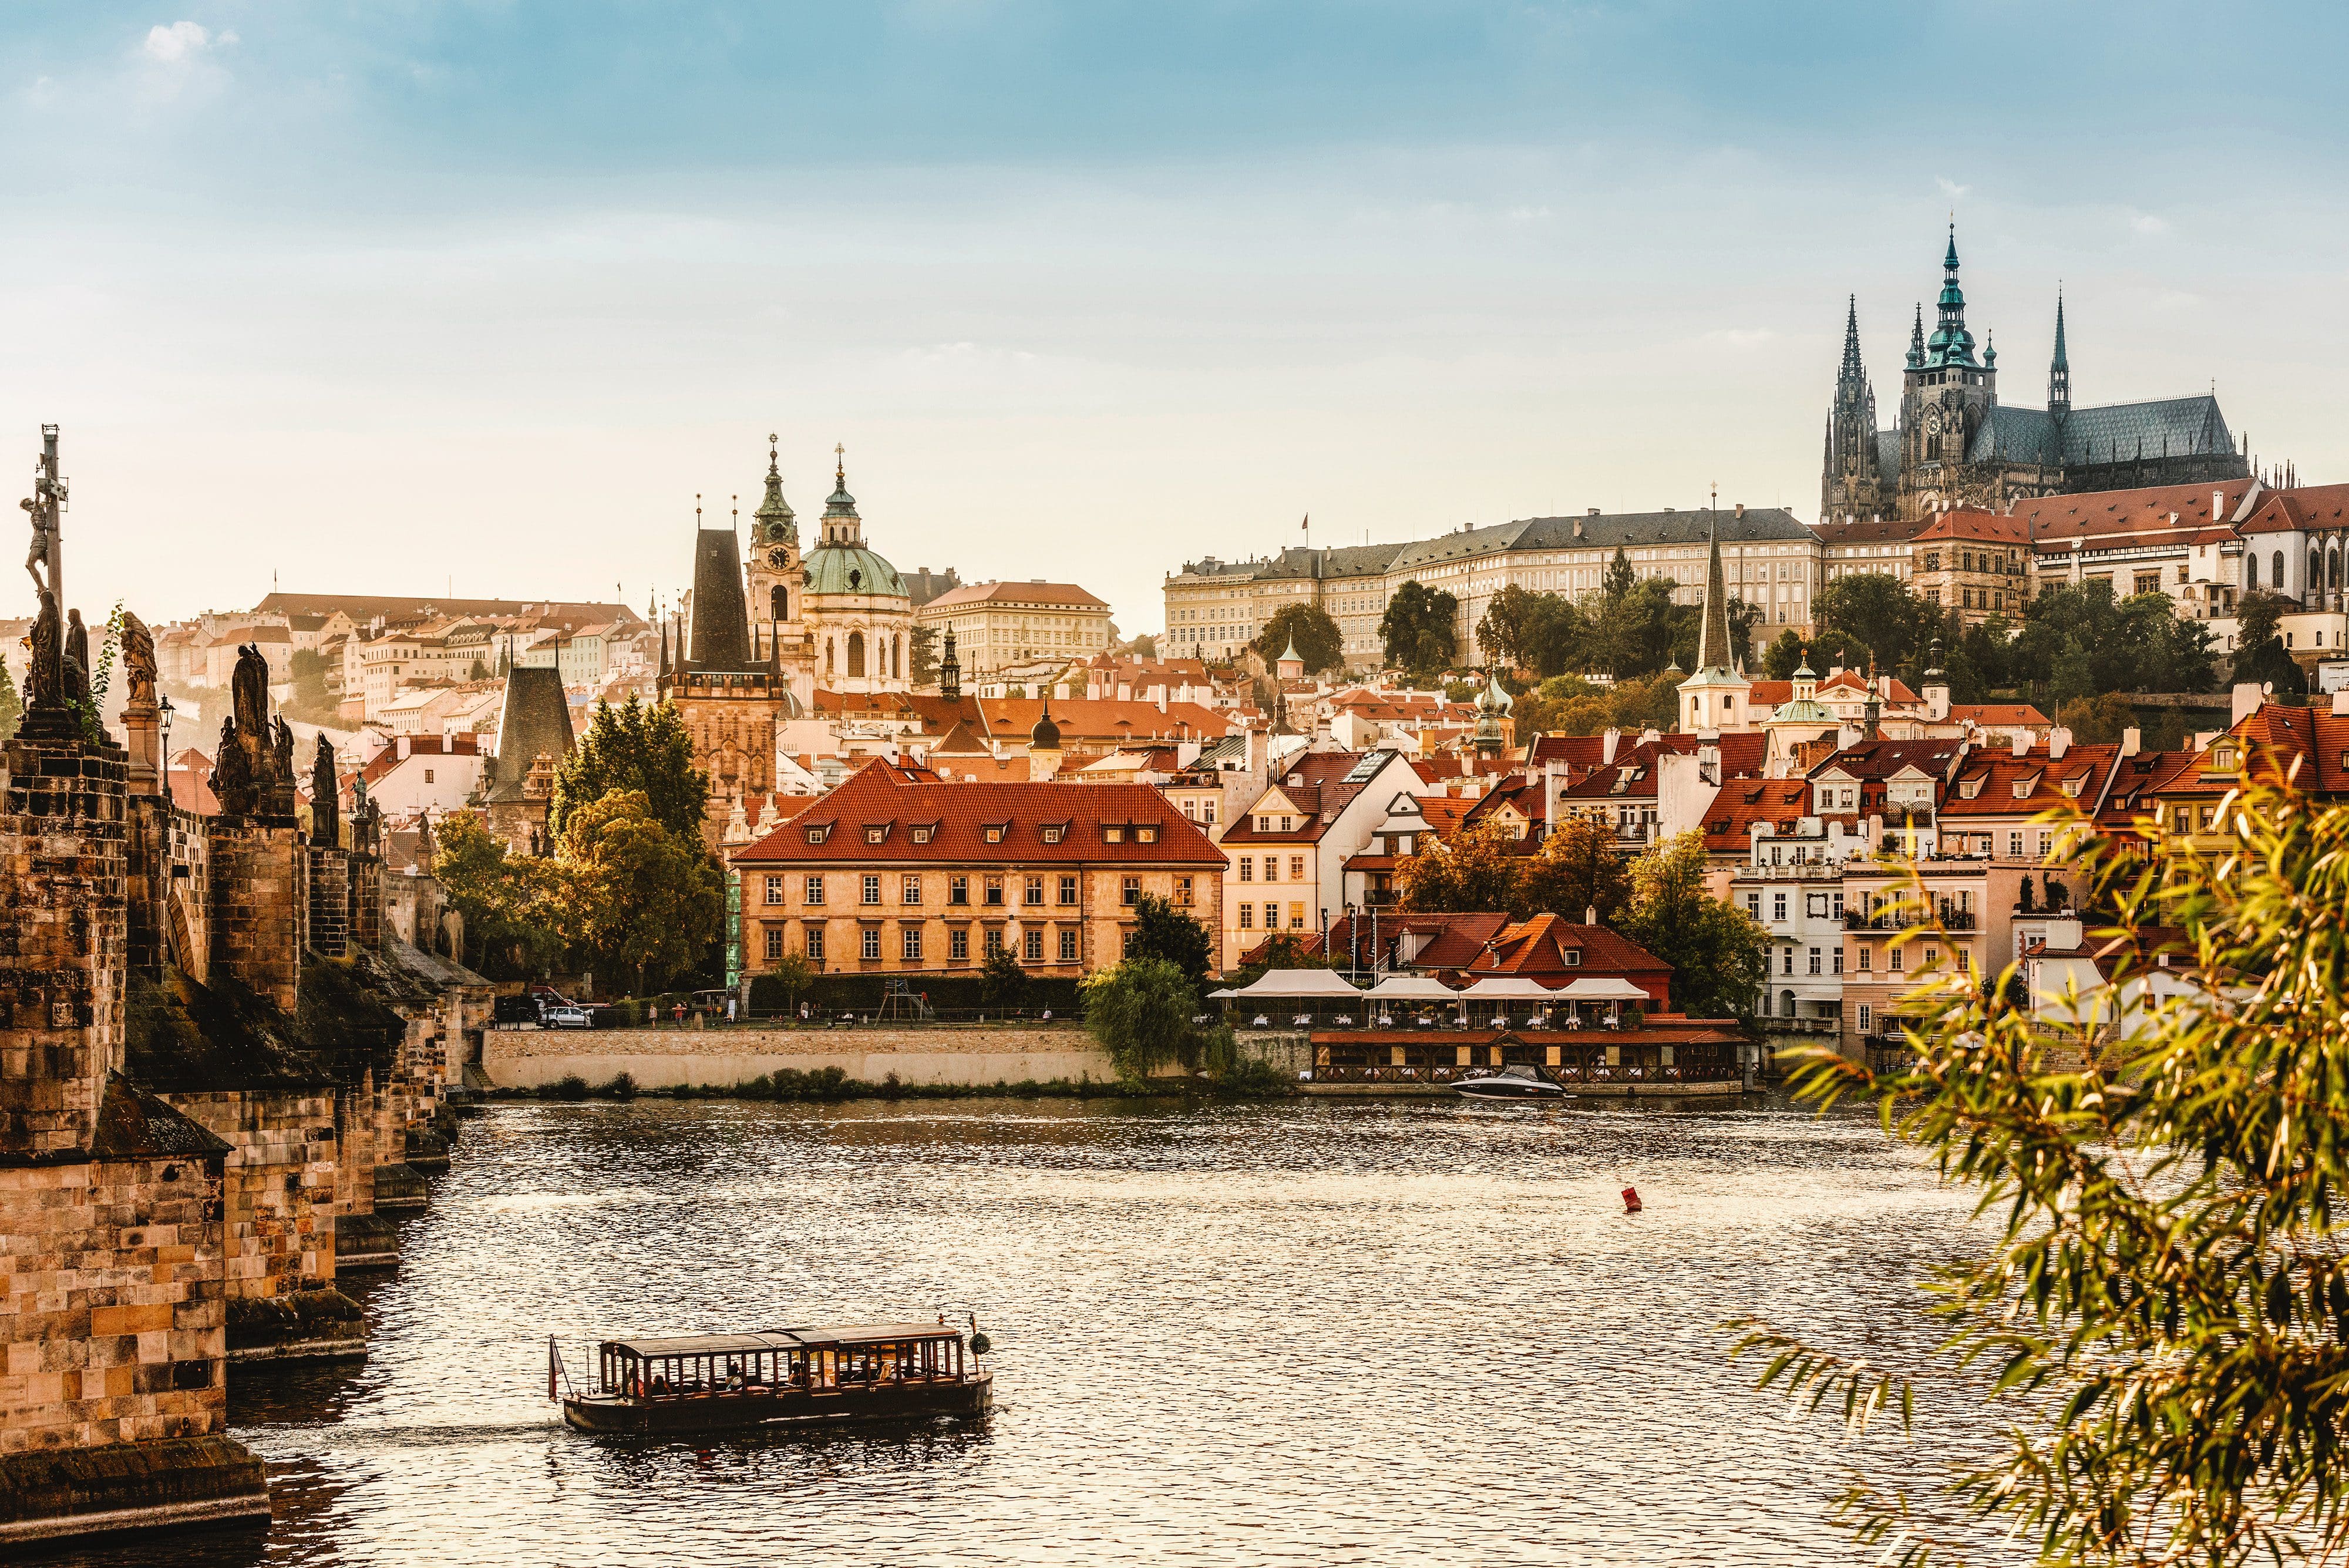 View across the river towards Prague cathedral